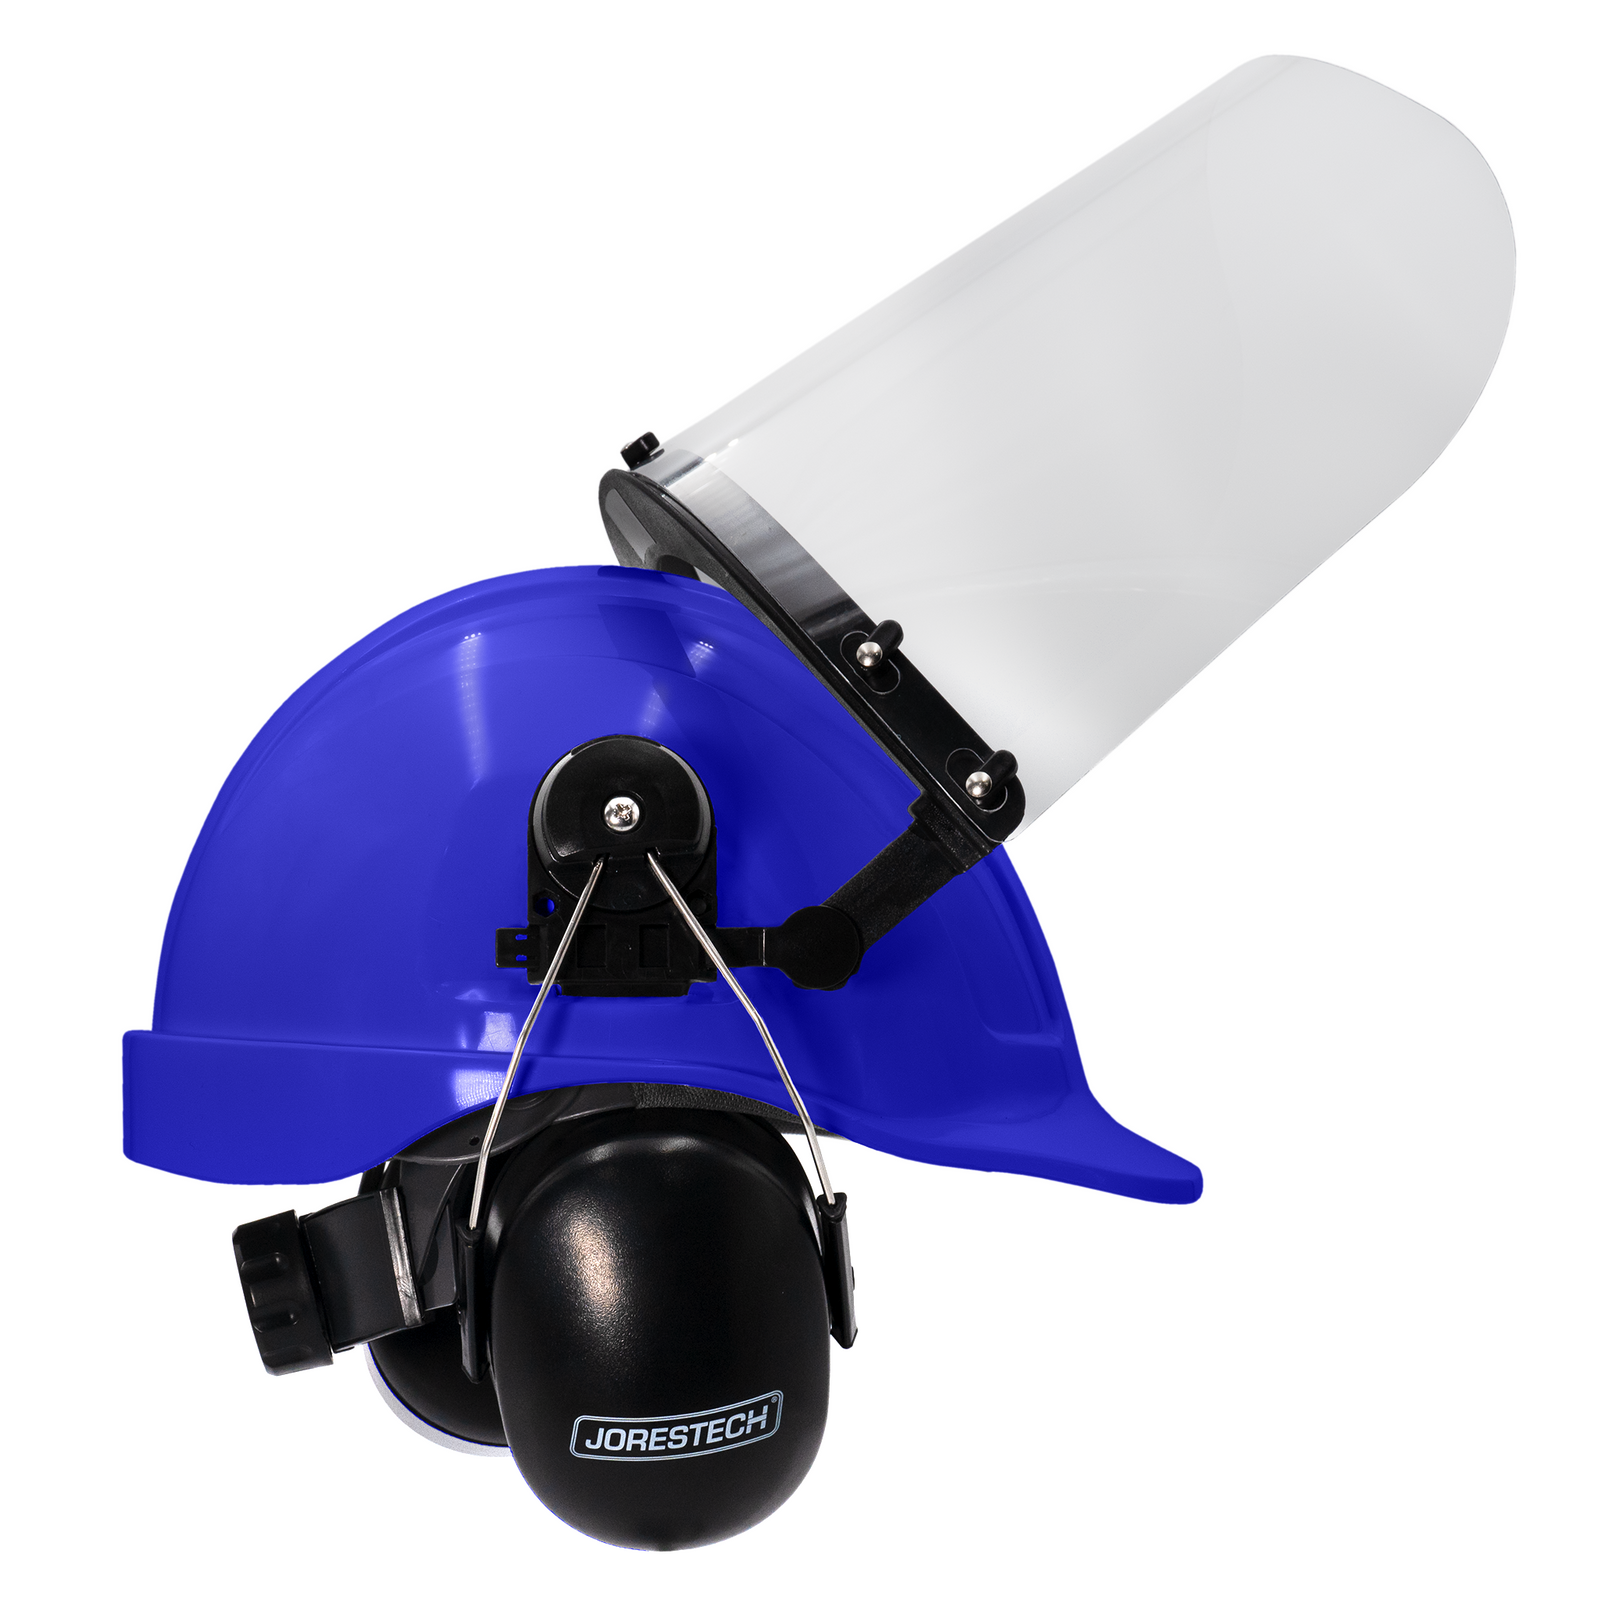 Blue cap style hard hat kit with mountable earmuffs and hi-transparency face shield